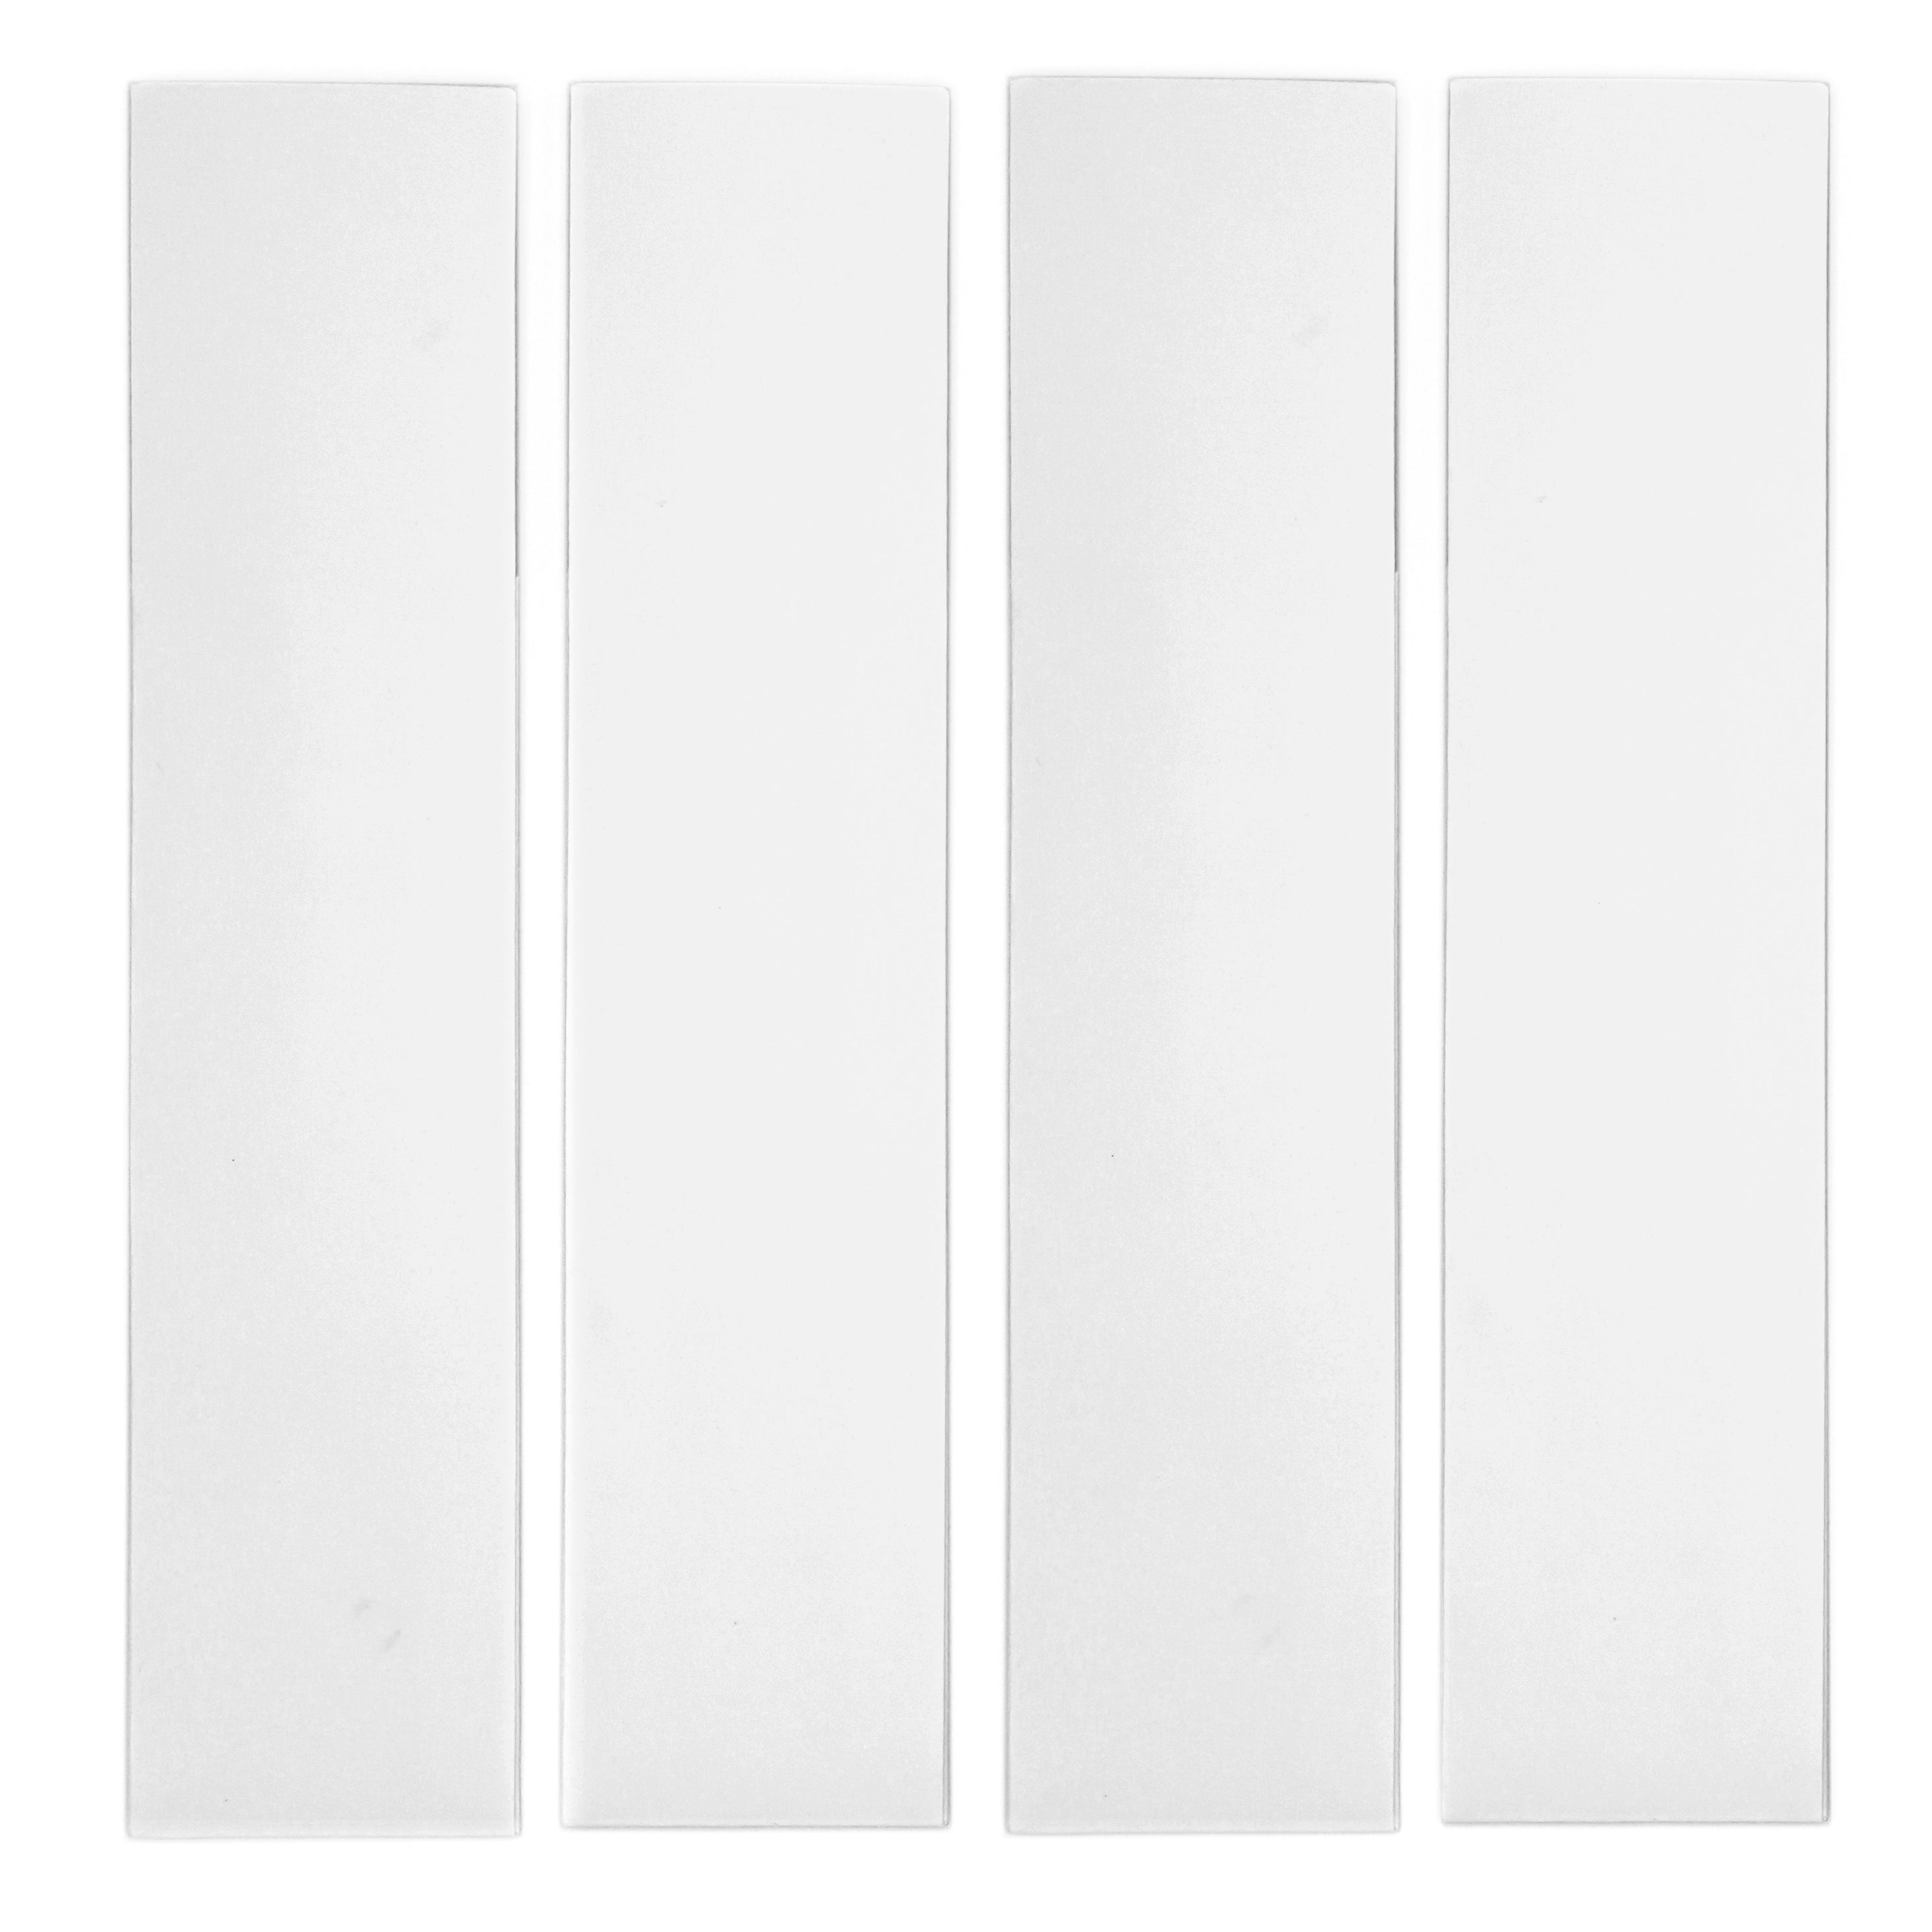 Blank Pencil Sleeve 4-pack in White